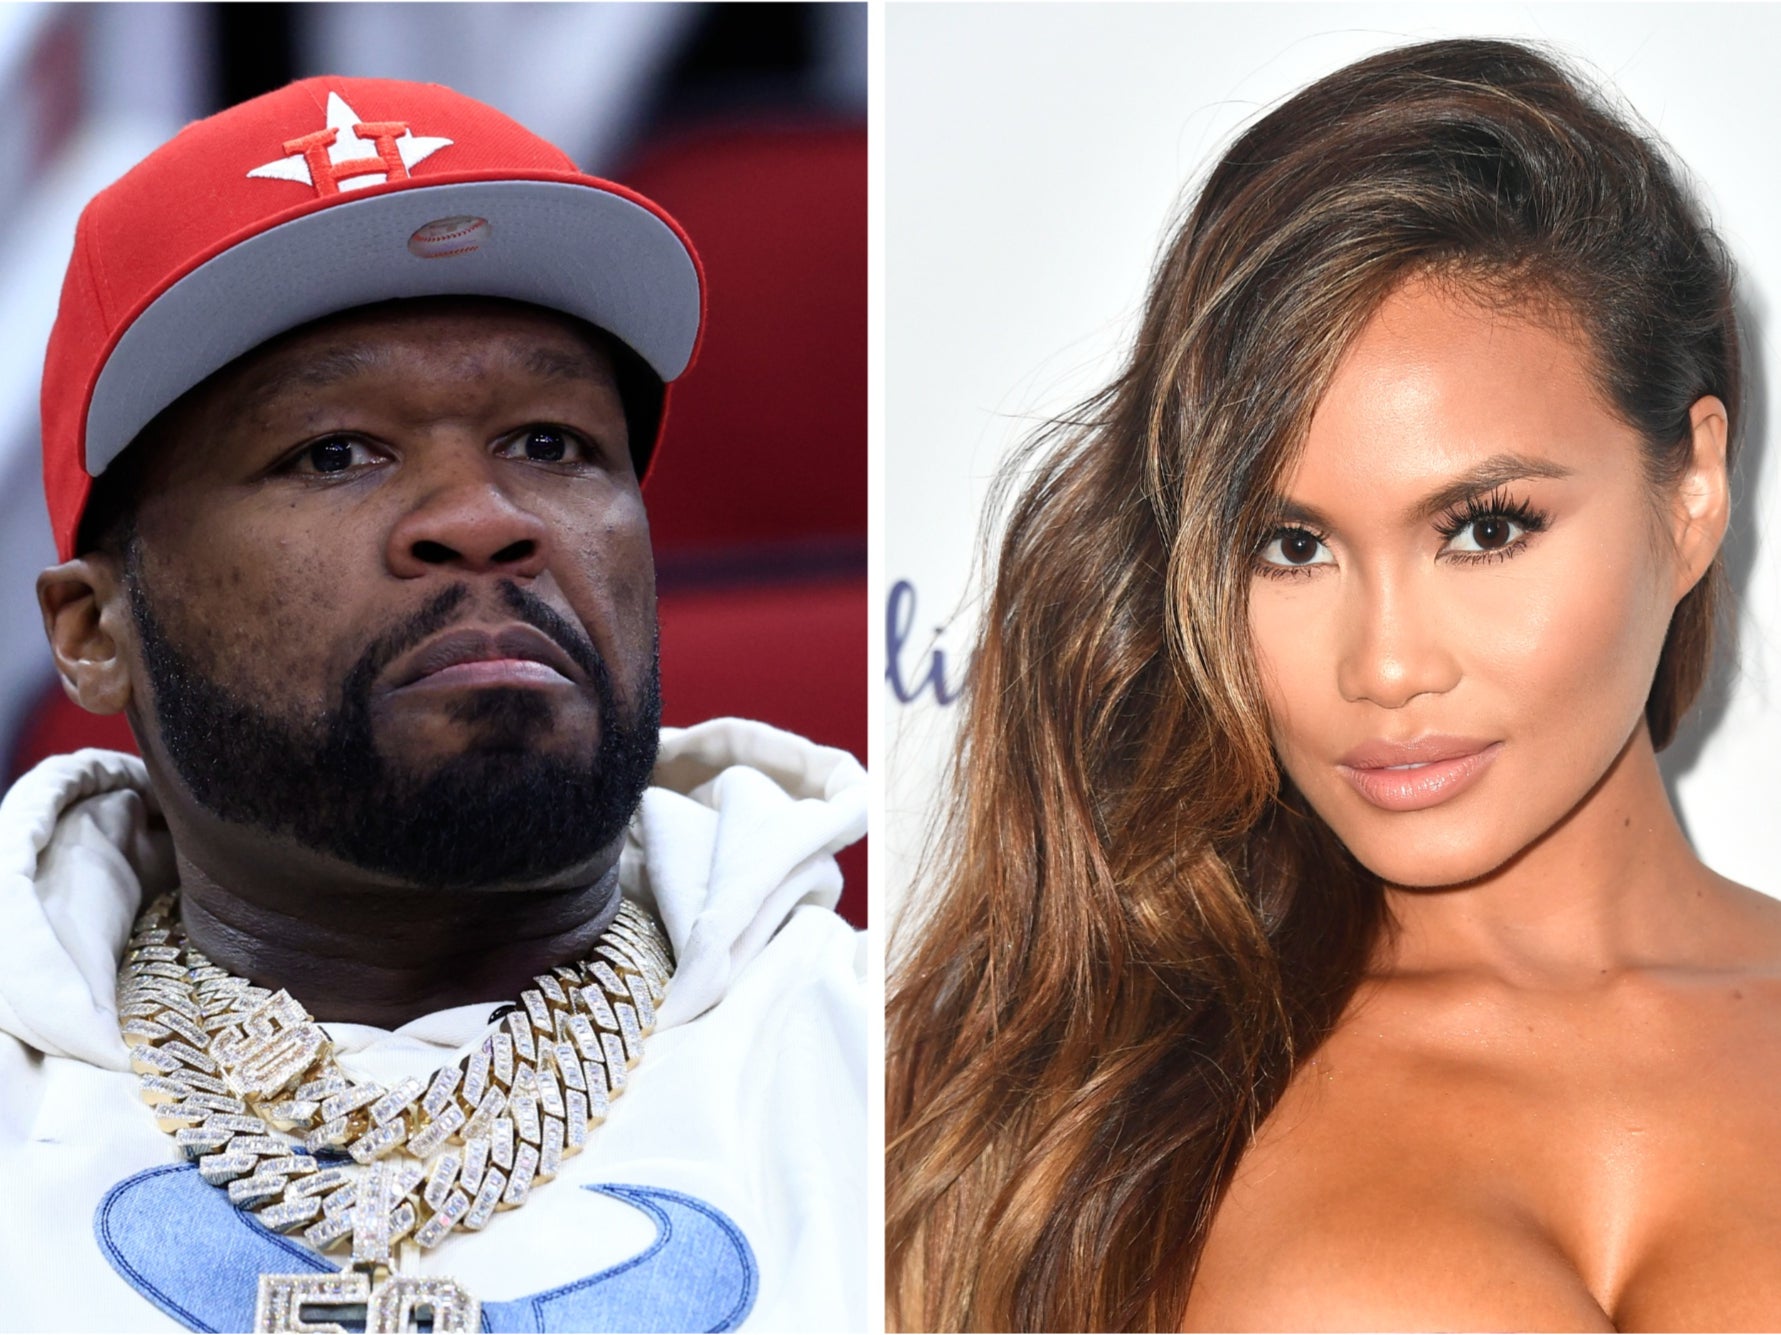 50 Cent and Daphne Joy, pictured, dated and had a child together